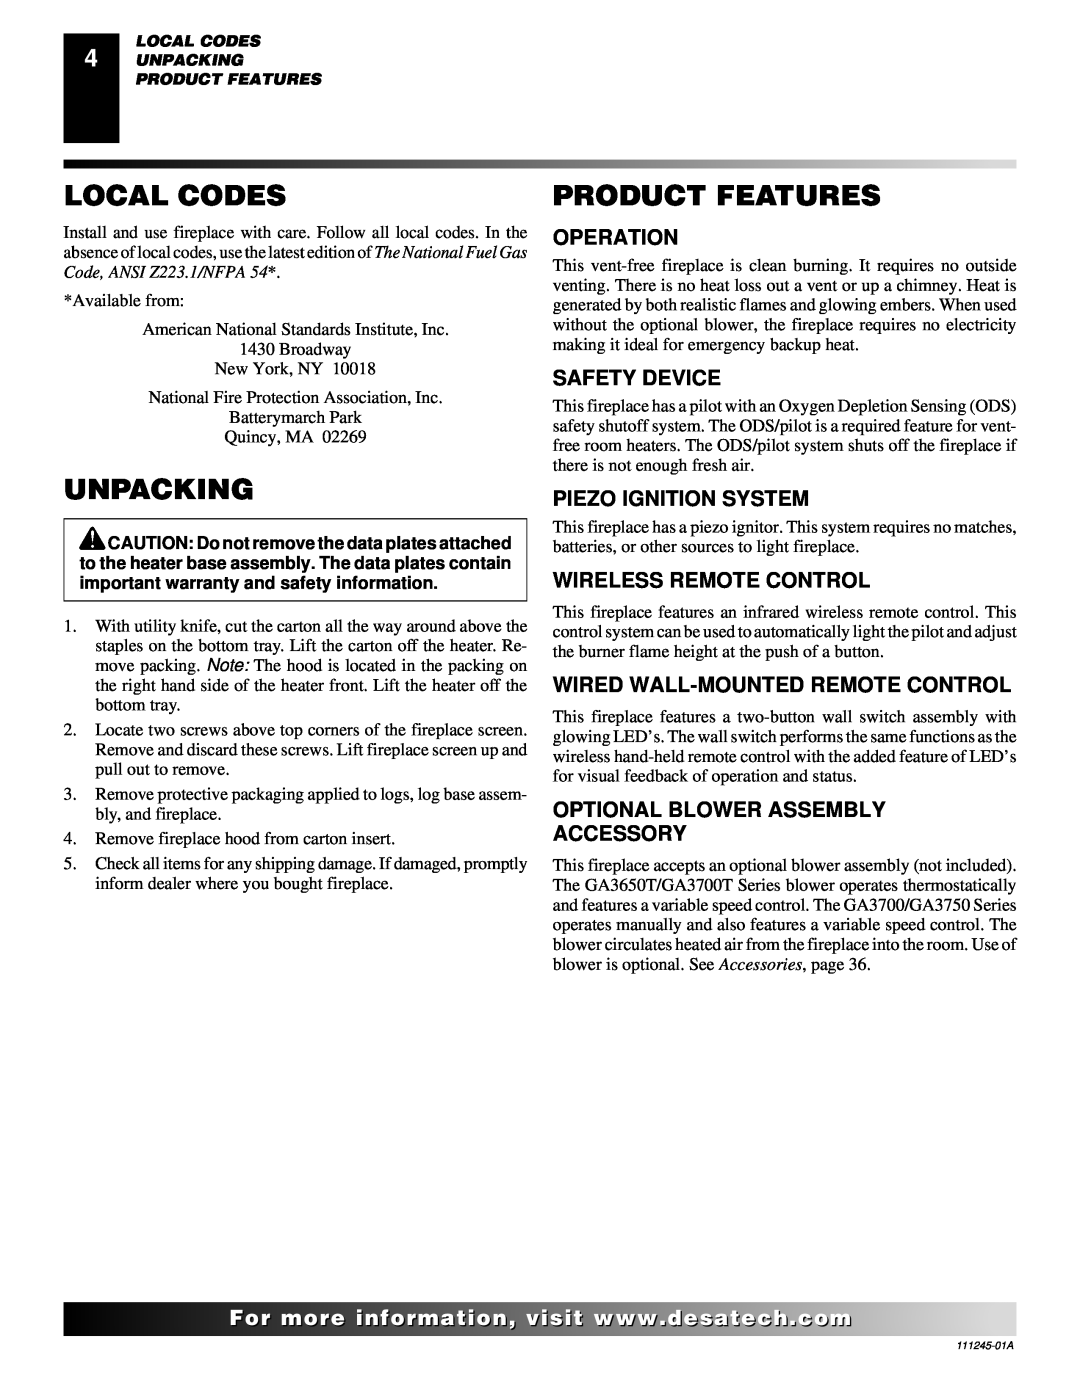 Desa CGEFP33PRB, CGEFP33NRB Local Codes, Unpacking, Product Features, Operation, Safety Device, Piezo Ignition System 